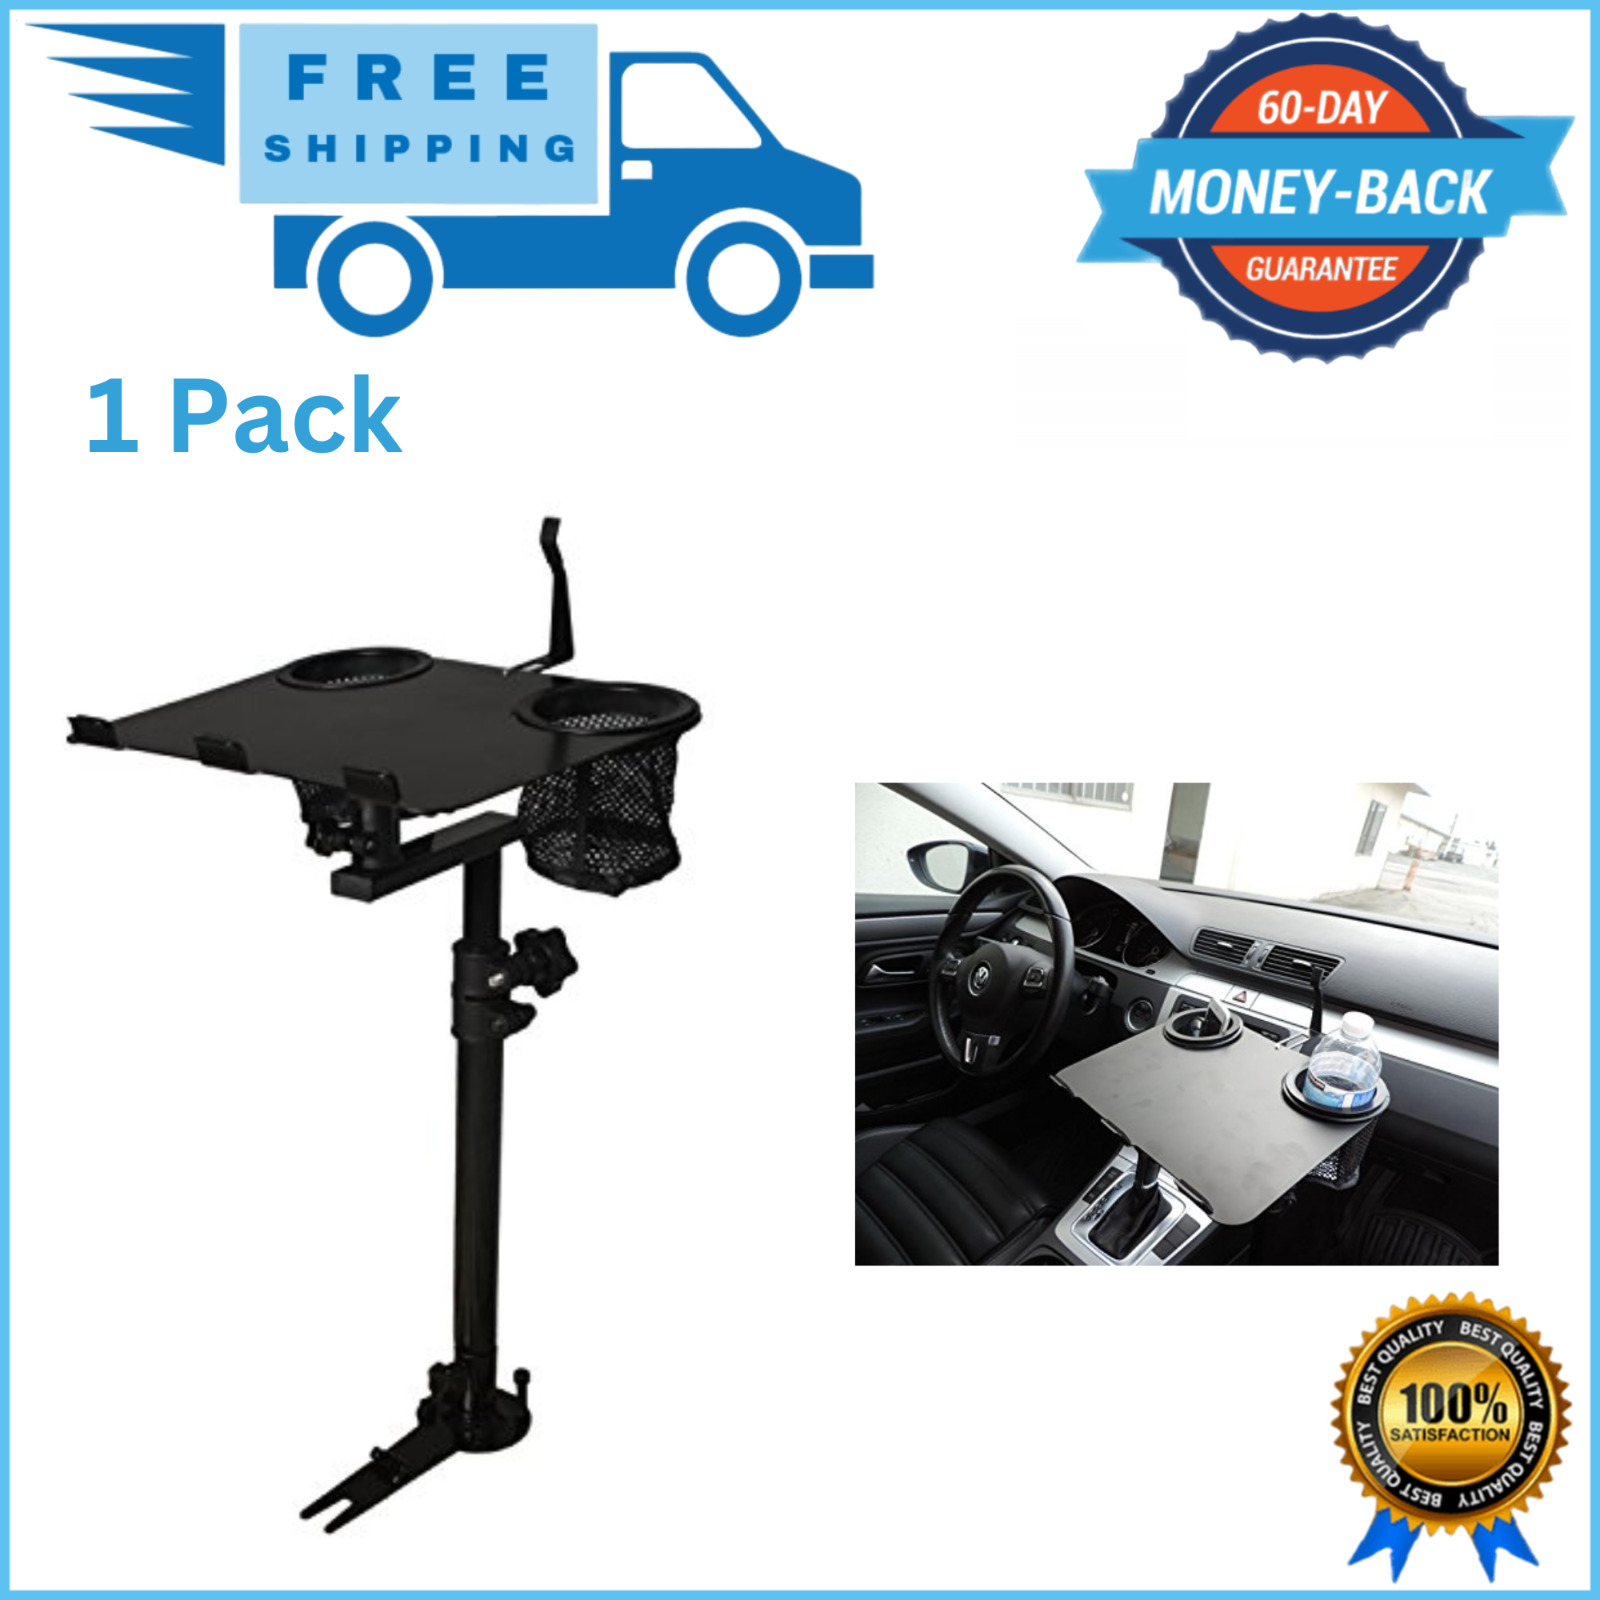 Aa-Products K005-B1 Car Laptop Mount Truck Vehicle Notebook Stand Holder with No